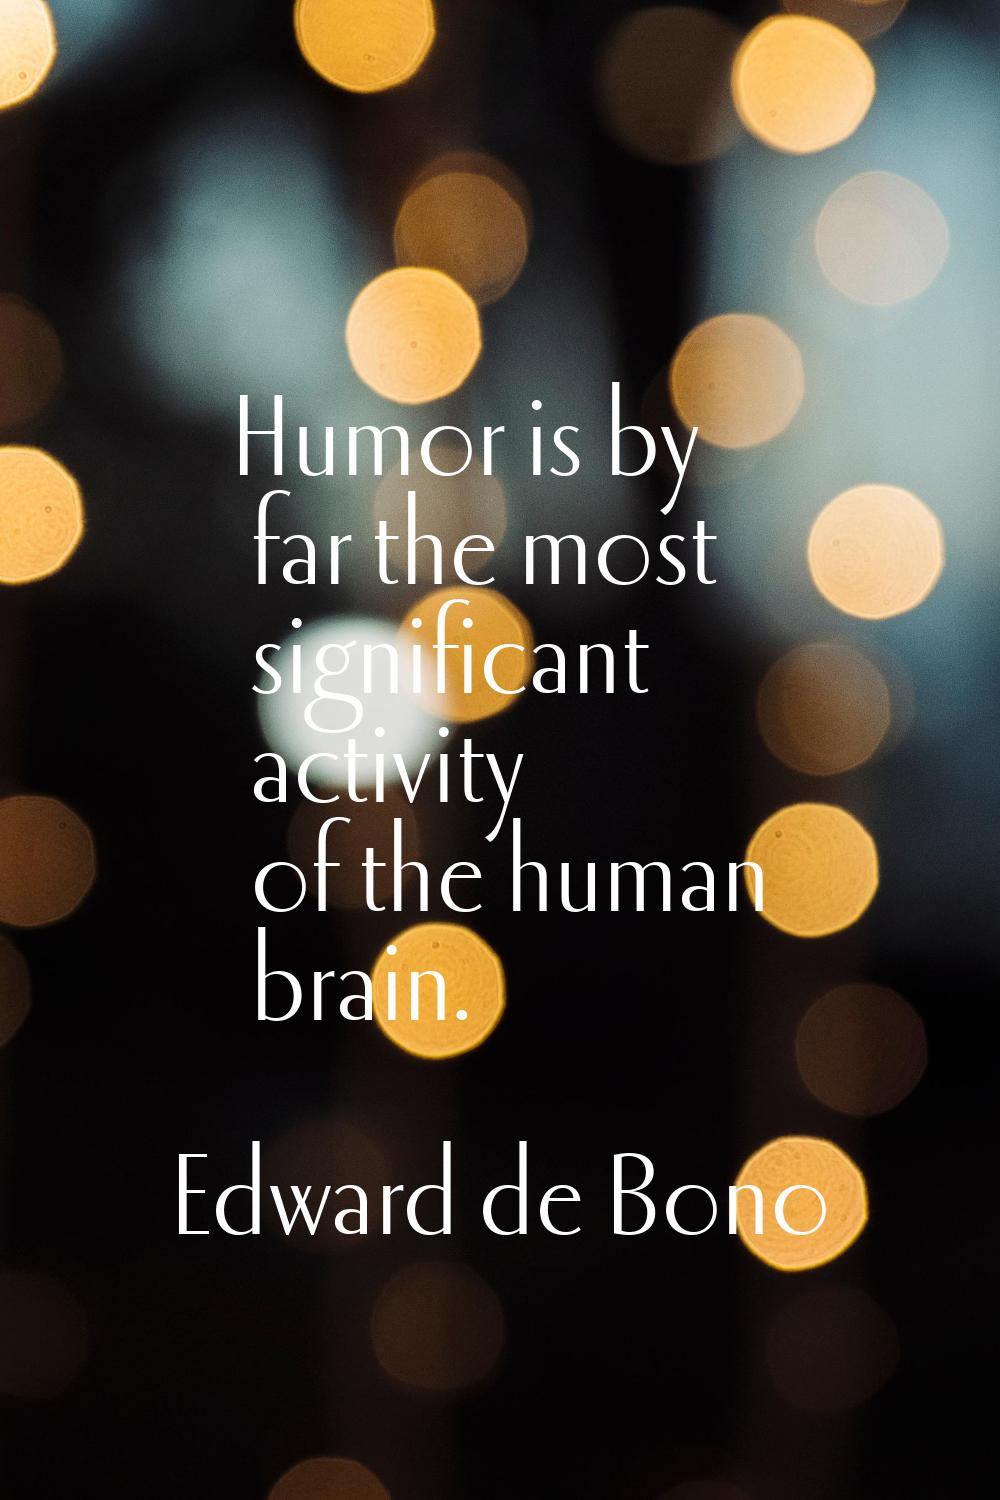 Humor is by far the most significant activity of the human brain.